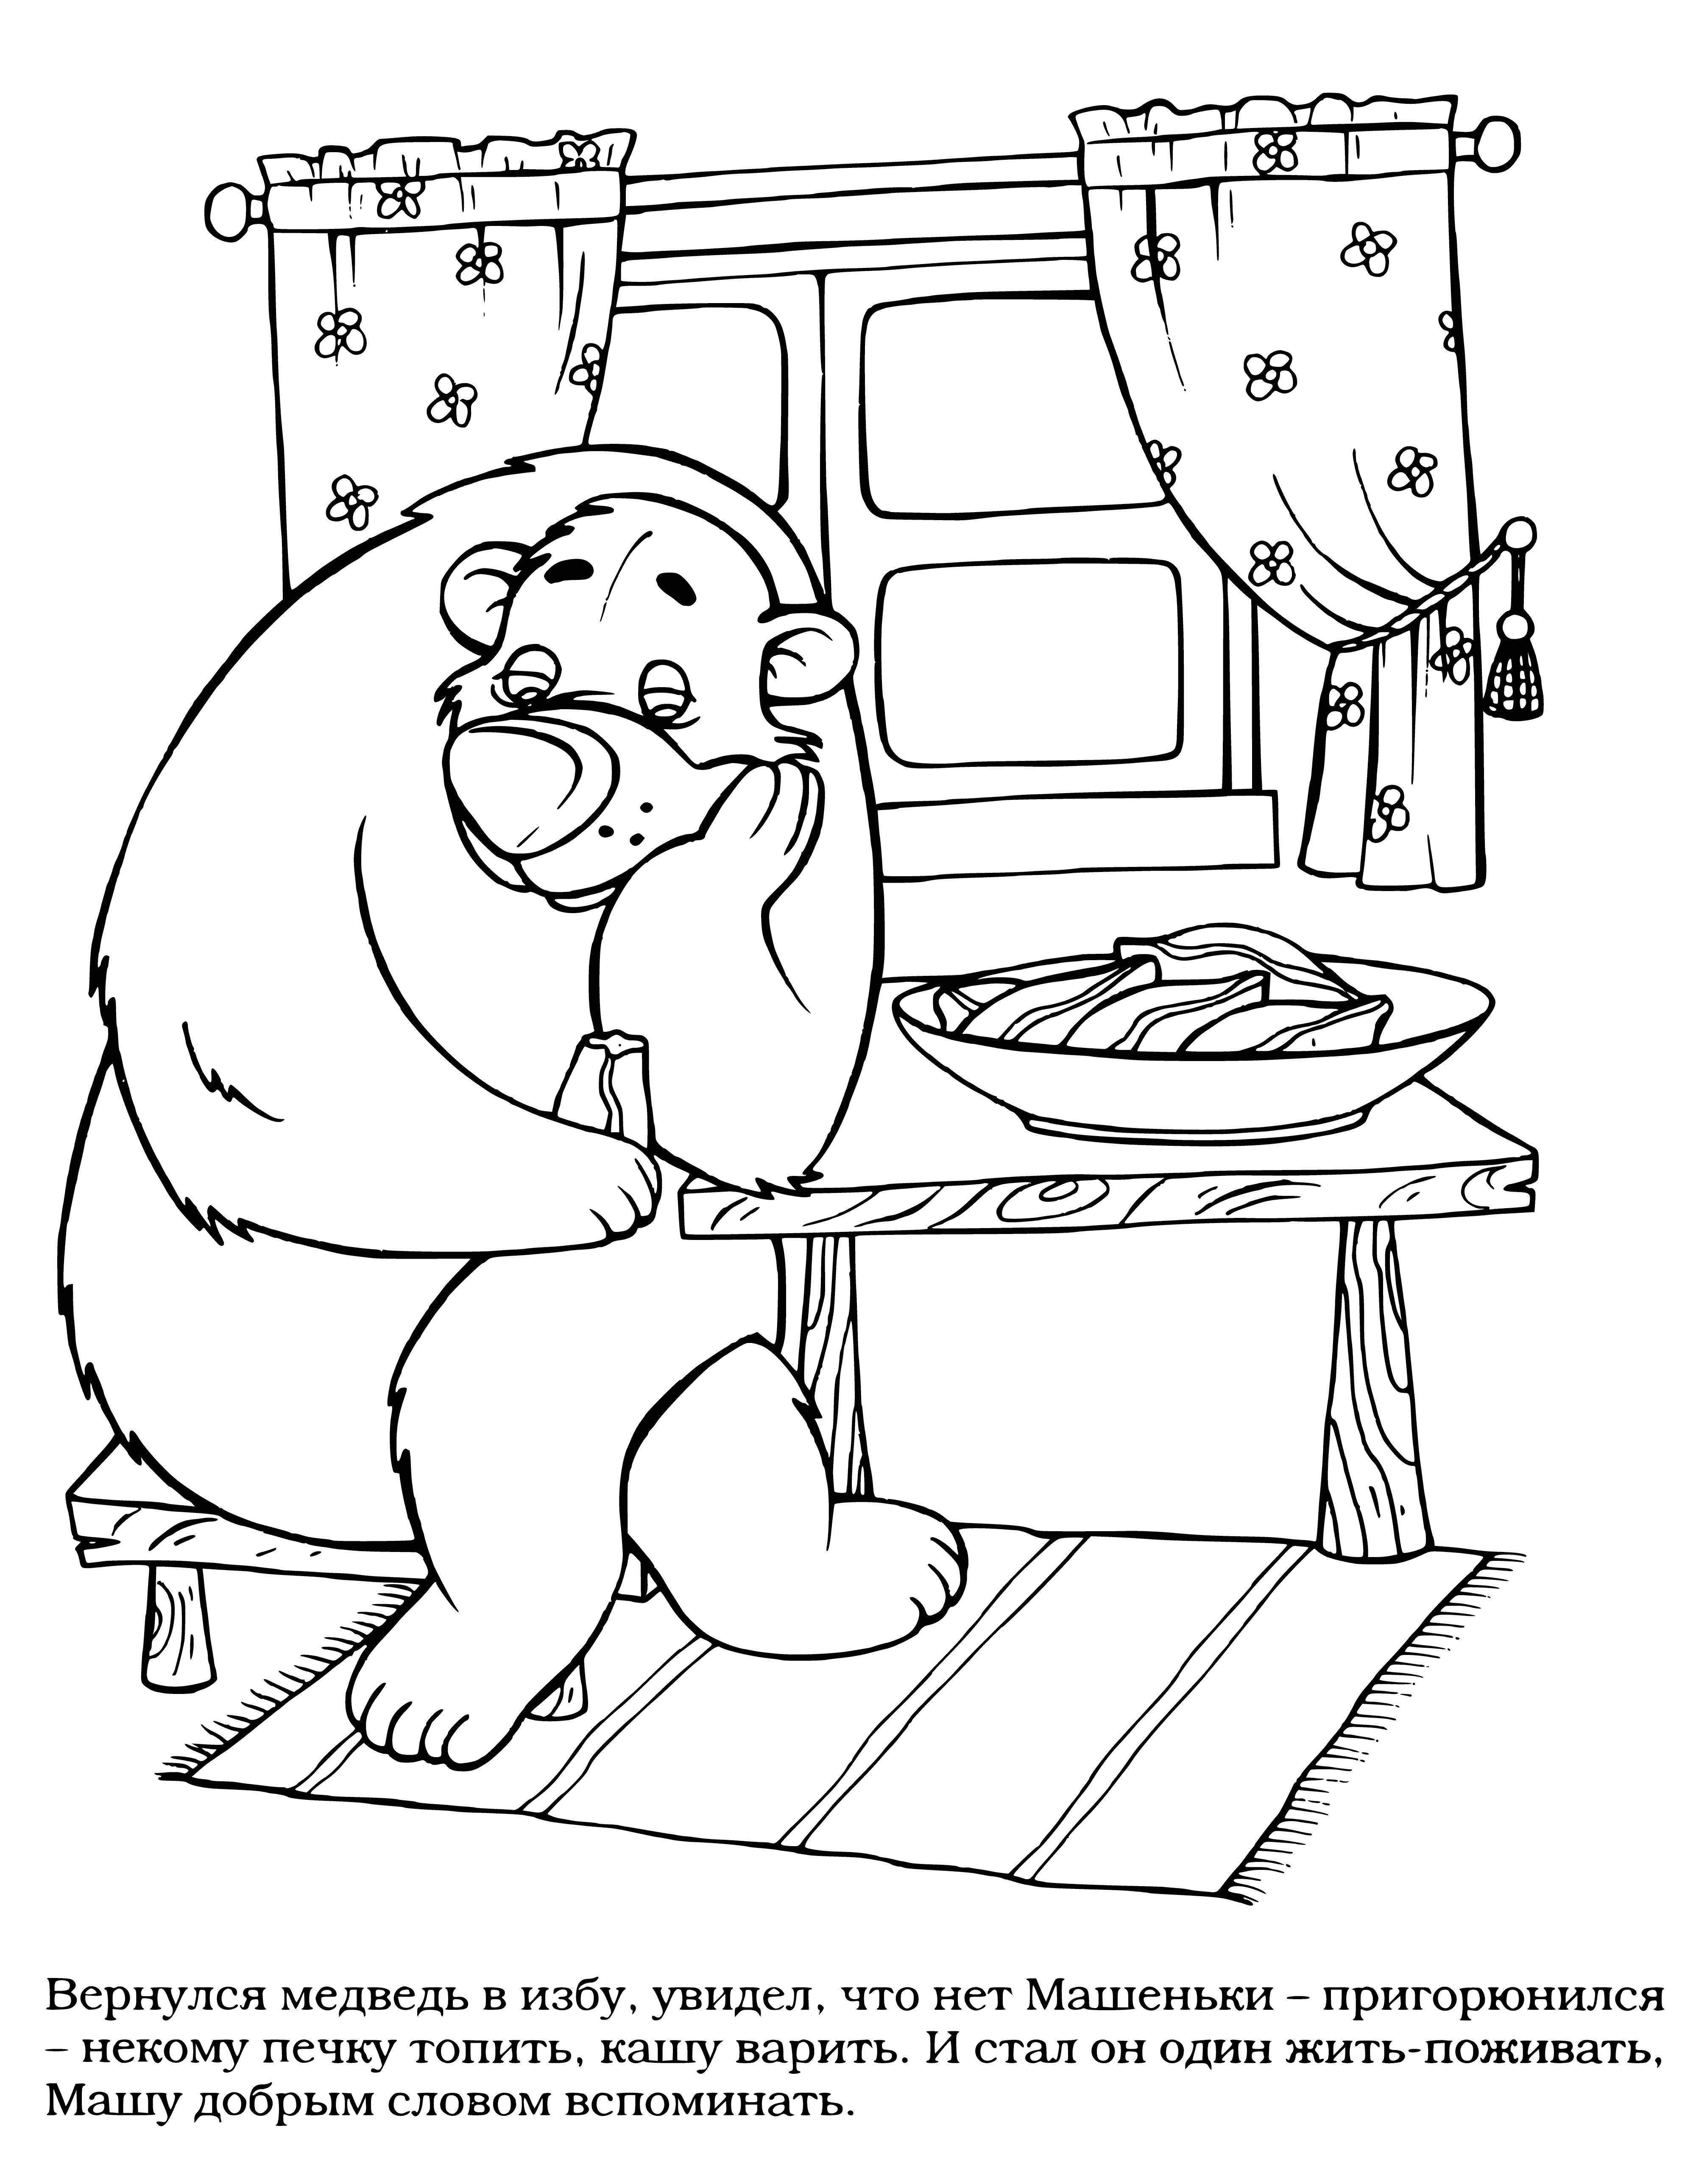 Bear in the hut coloring page